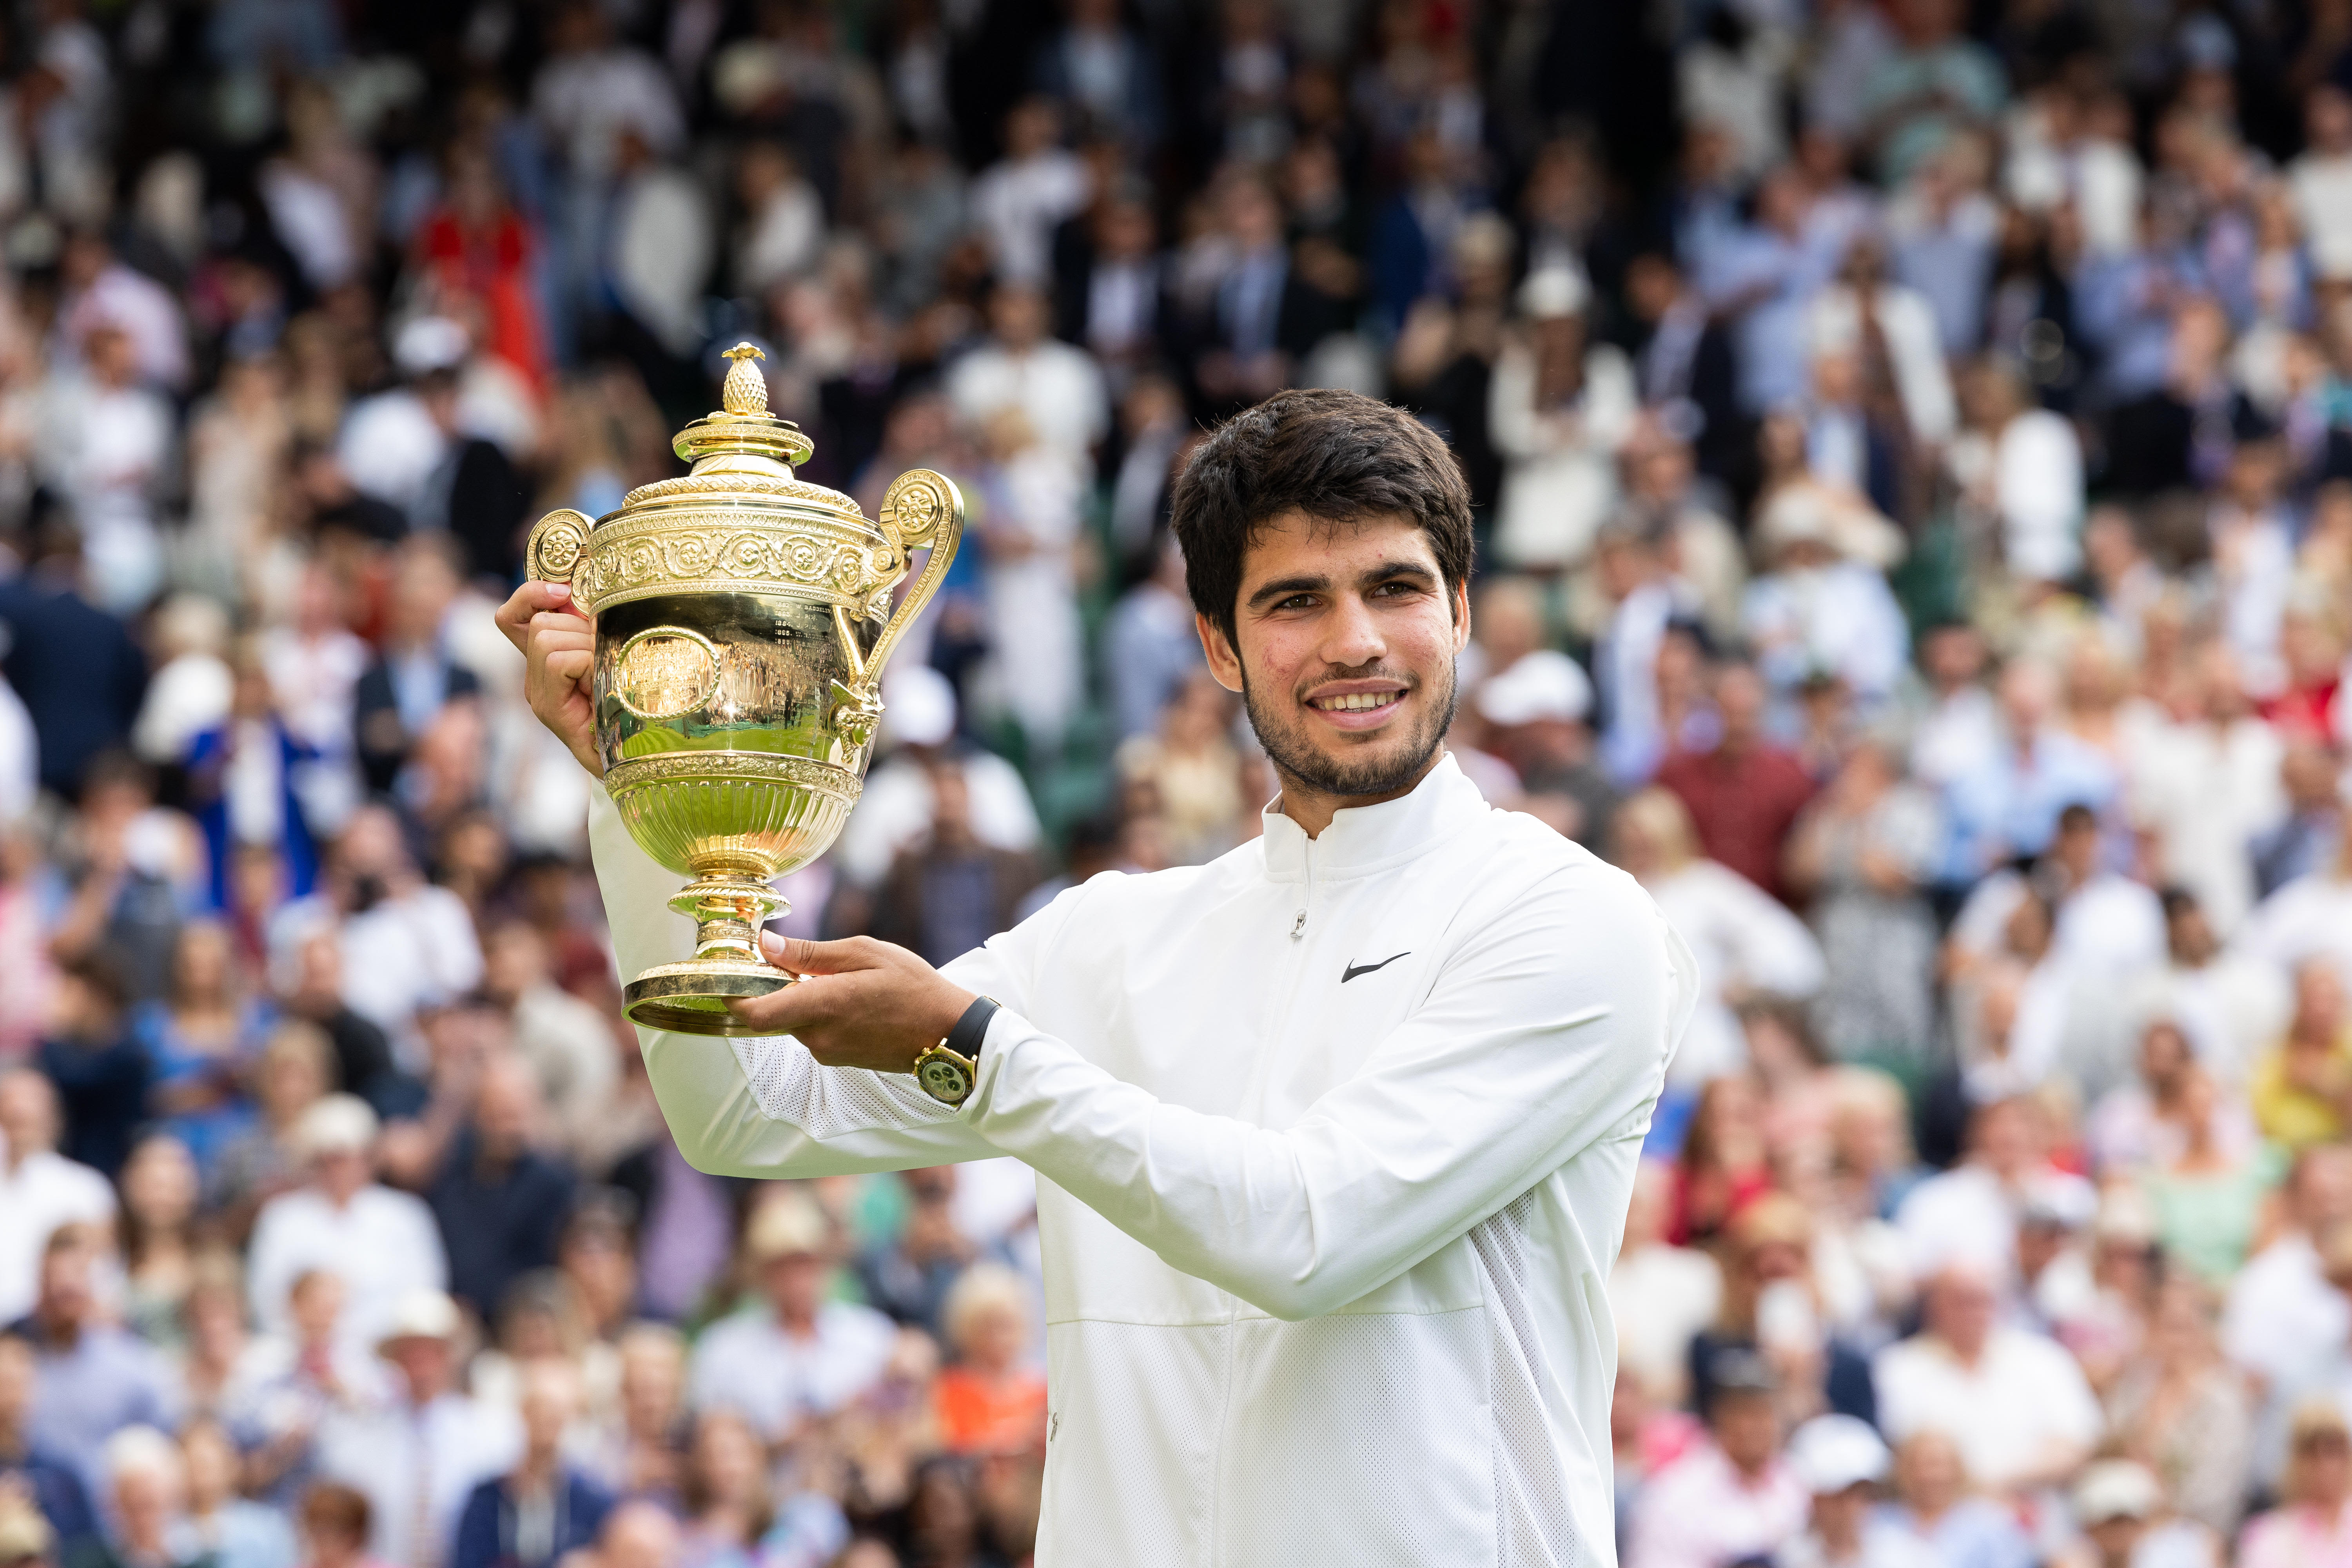 Here's how much the winners of Wimbledon get in prize money